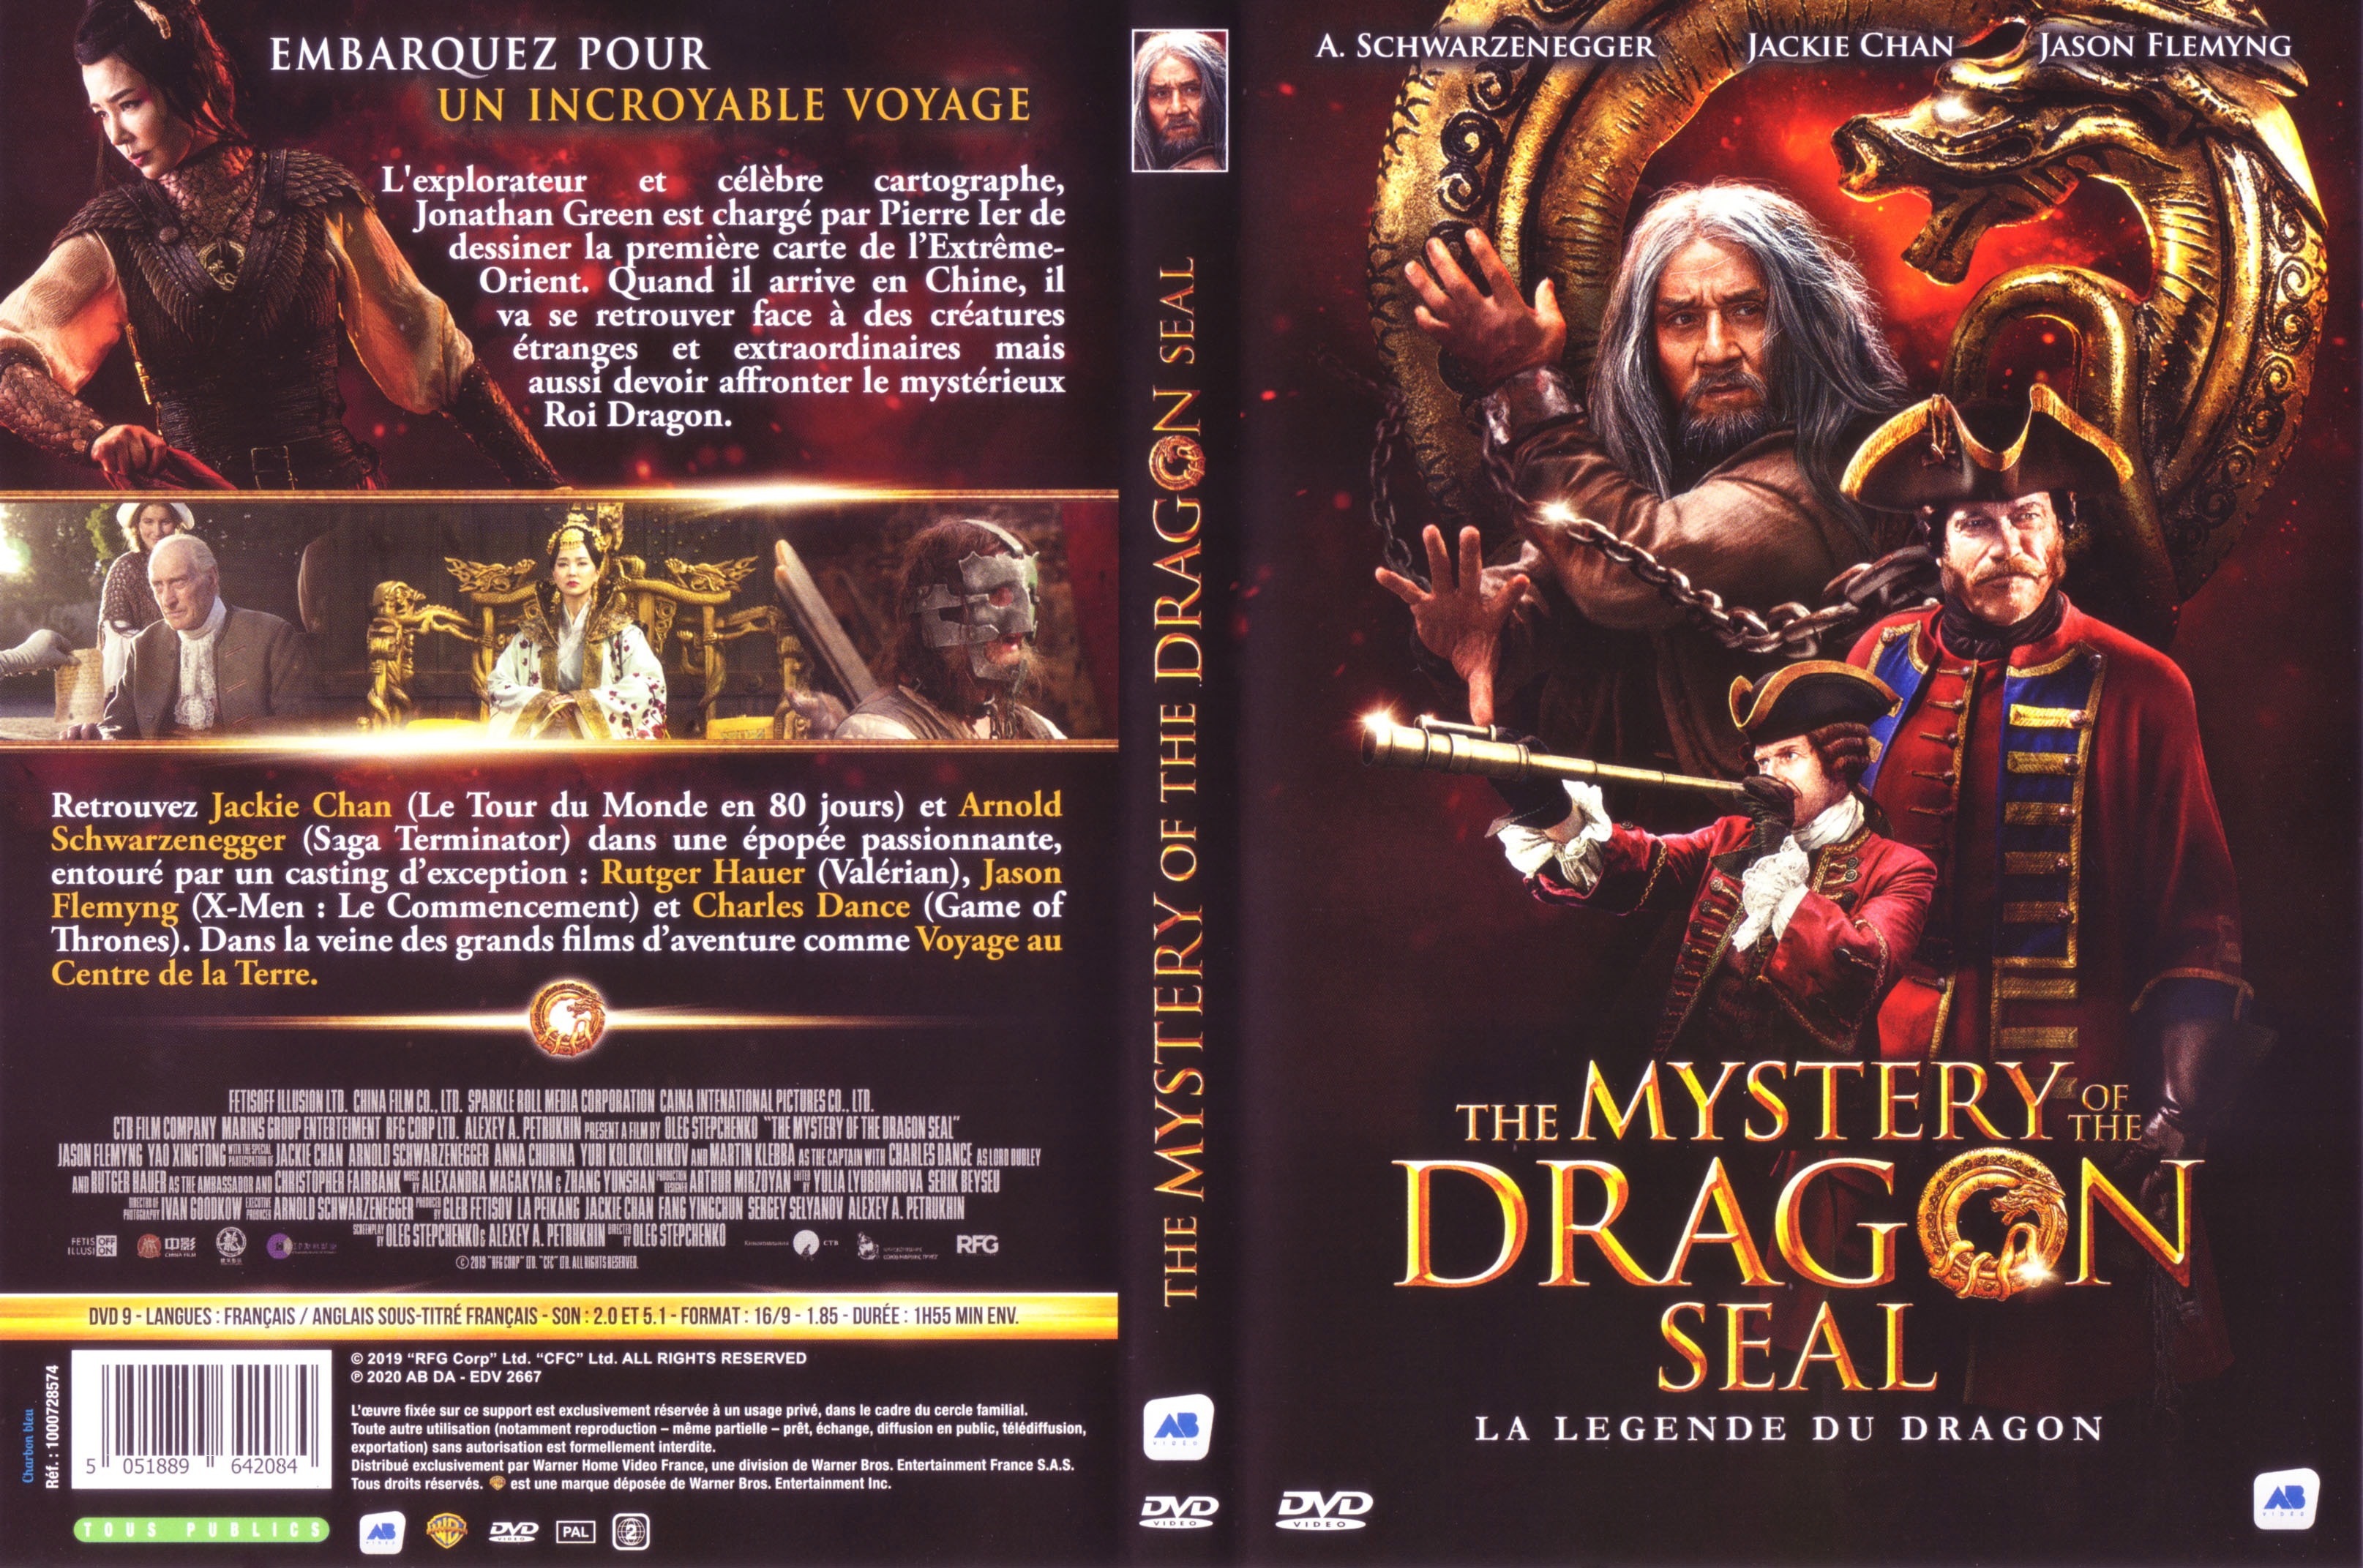 Jaquette DVD The mystery of the dragon seal - La lgende du dragon